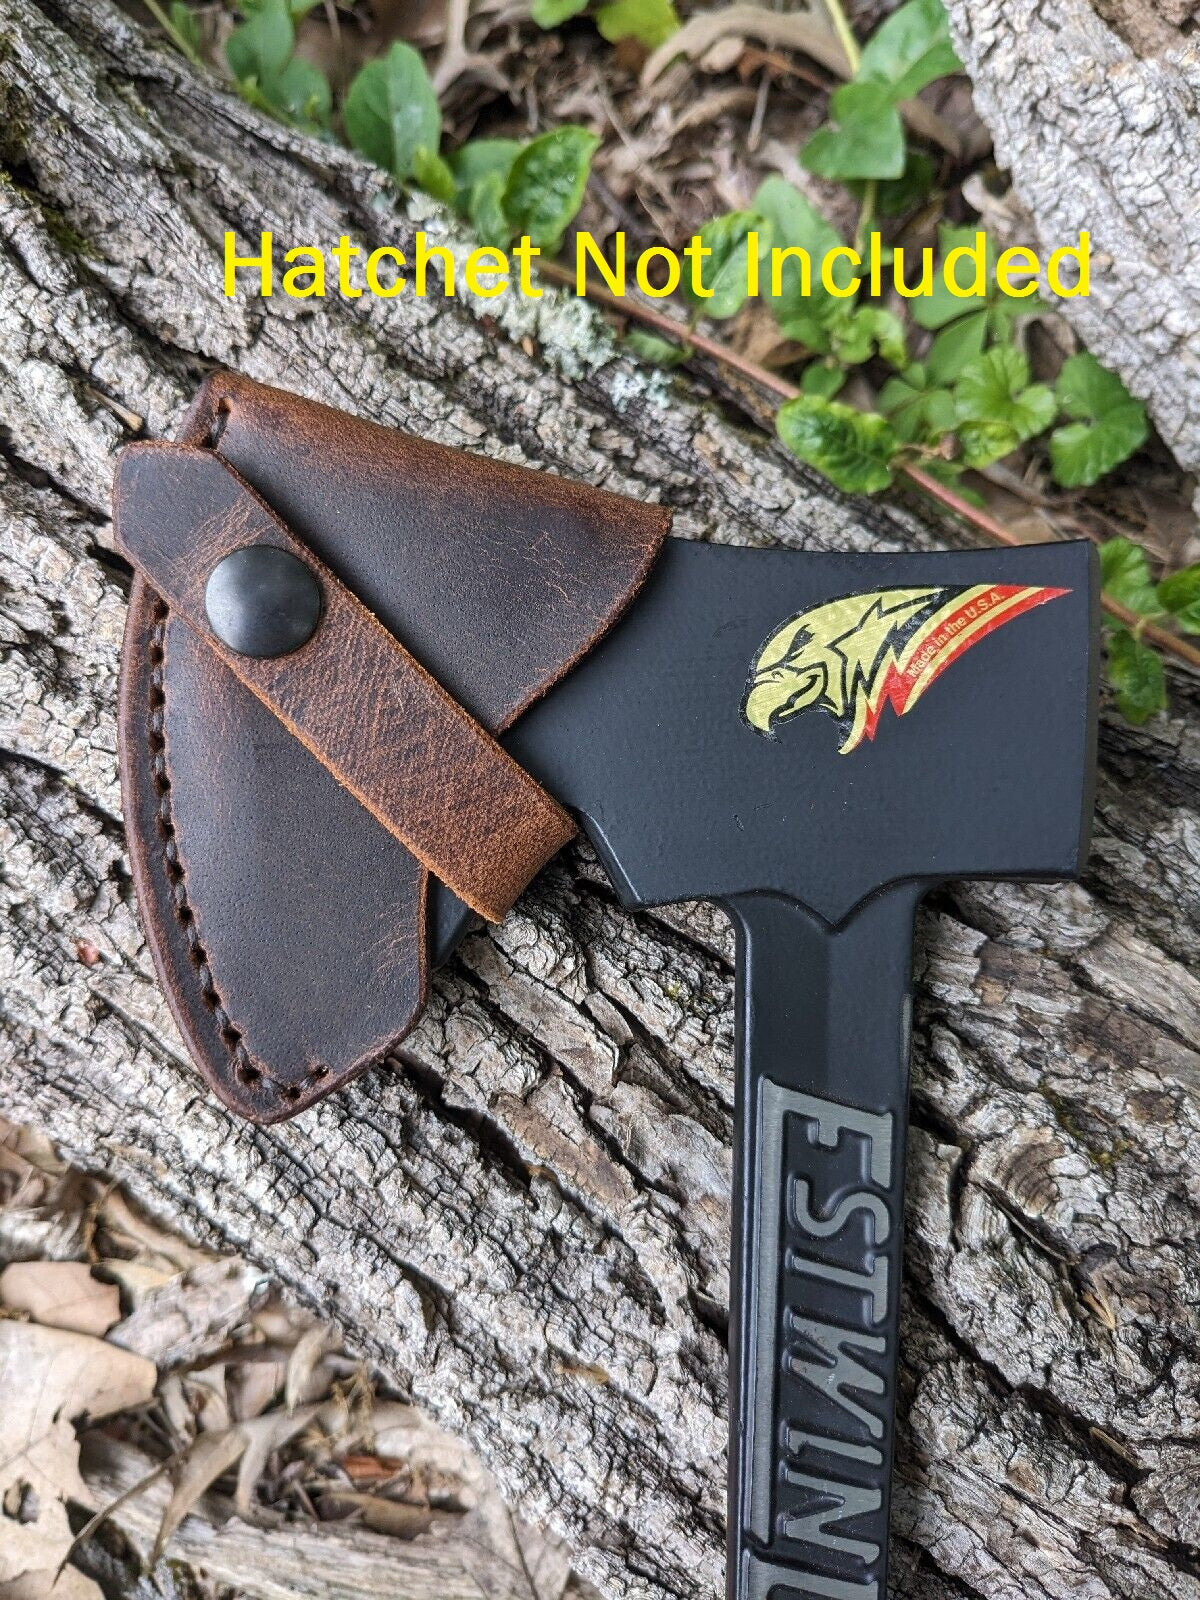 Handmade Leather Sheath For Estwing Hatchet & Axe Models (12" Woodsman, 14" Woodsman, 16" Campers Axe, 26" Campers Axe, Fireside Friend Maul, Camper's Axe Stake Puller)